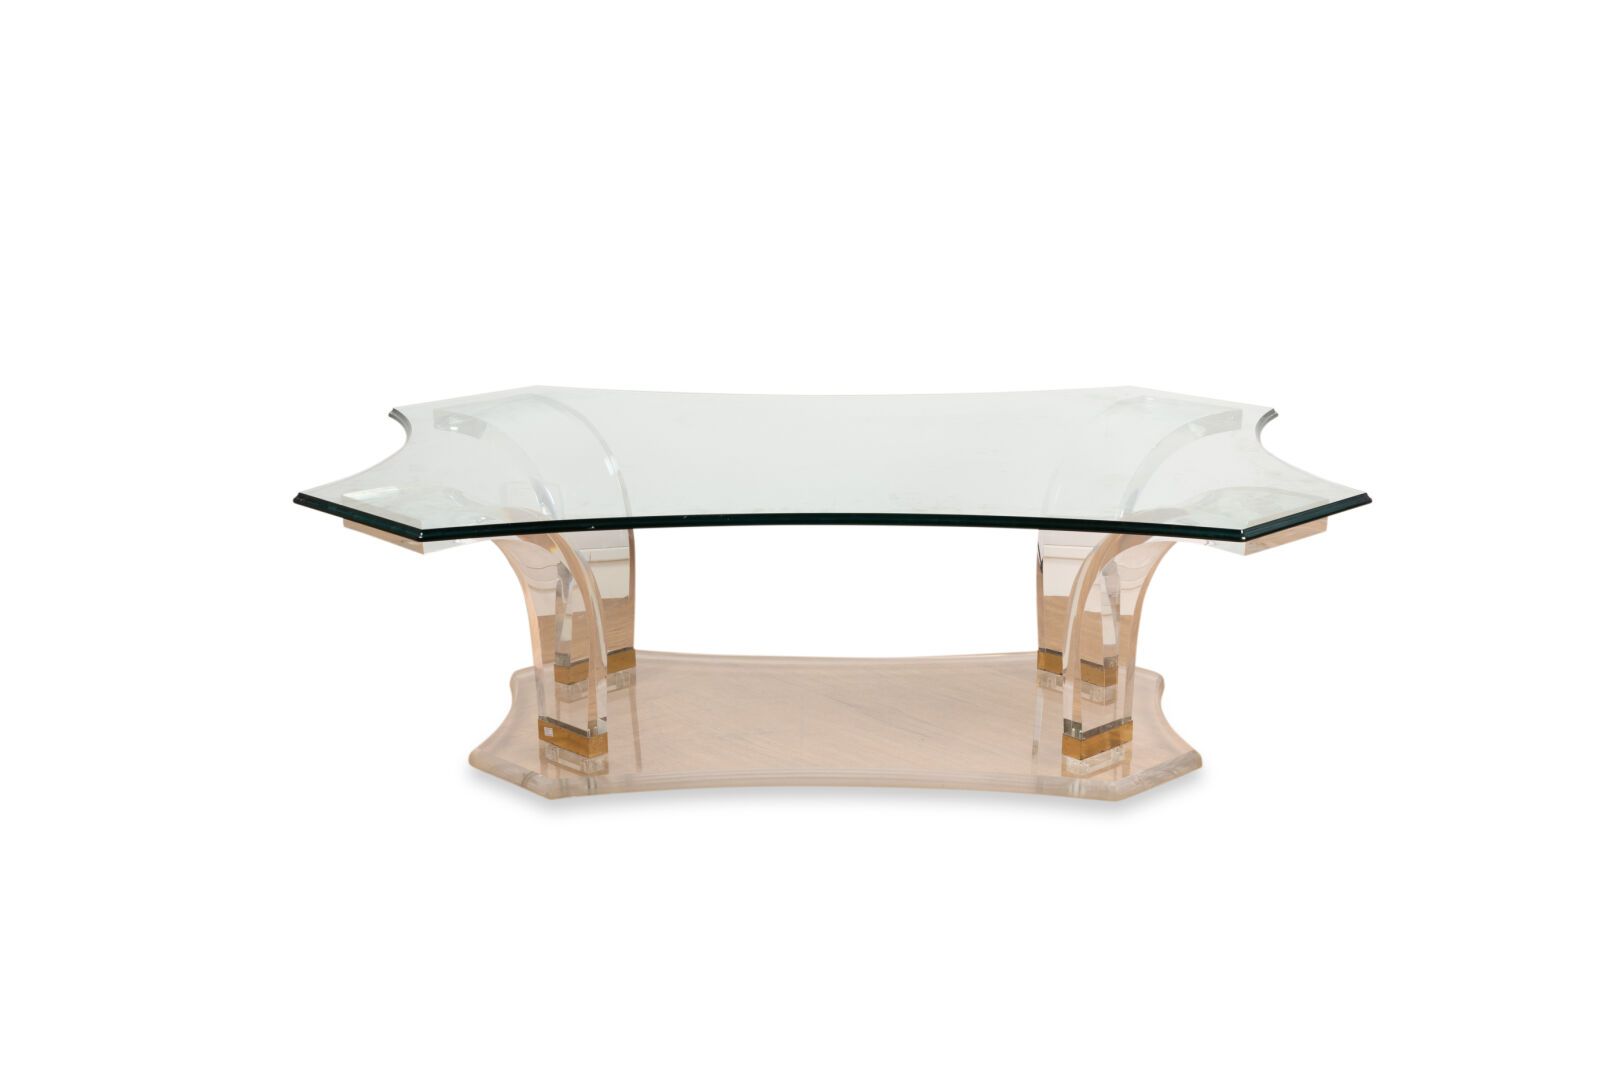 Maison ROMEO Low table with octagonal top 
The upside down base joined by a spac&hellip;